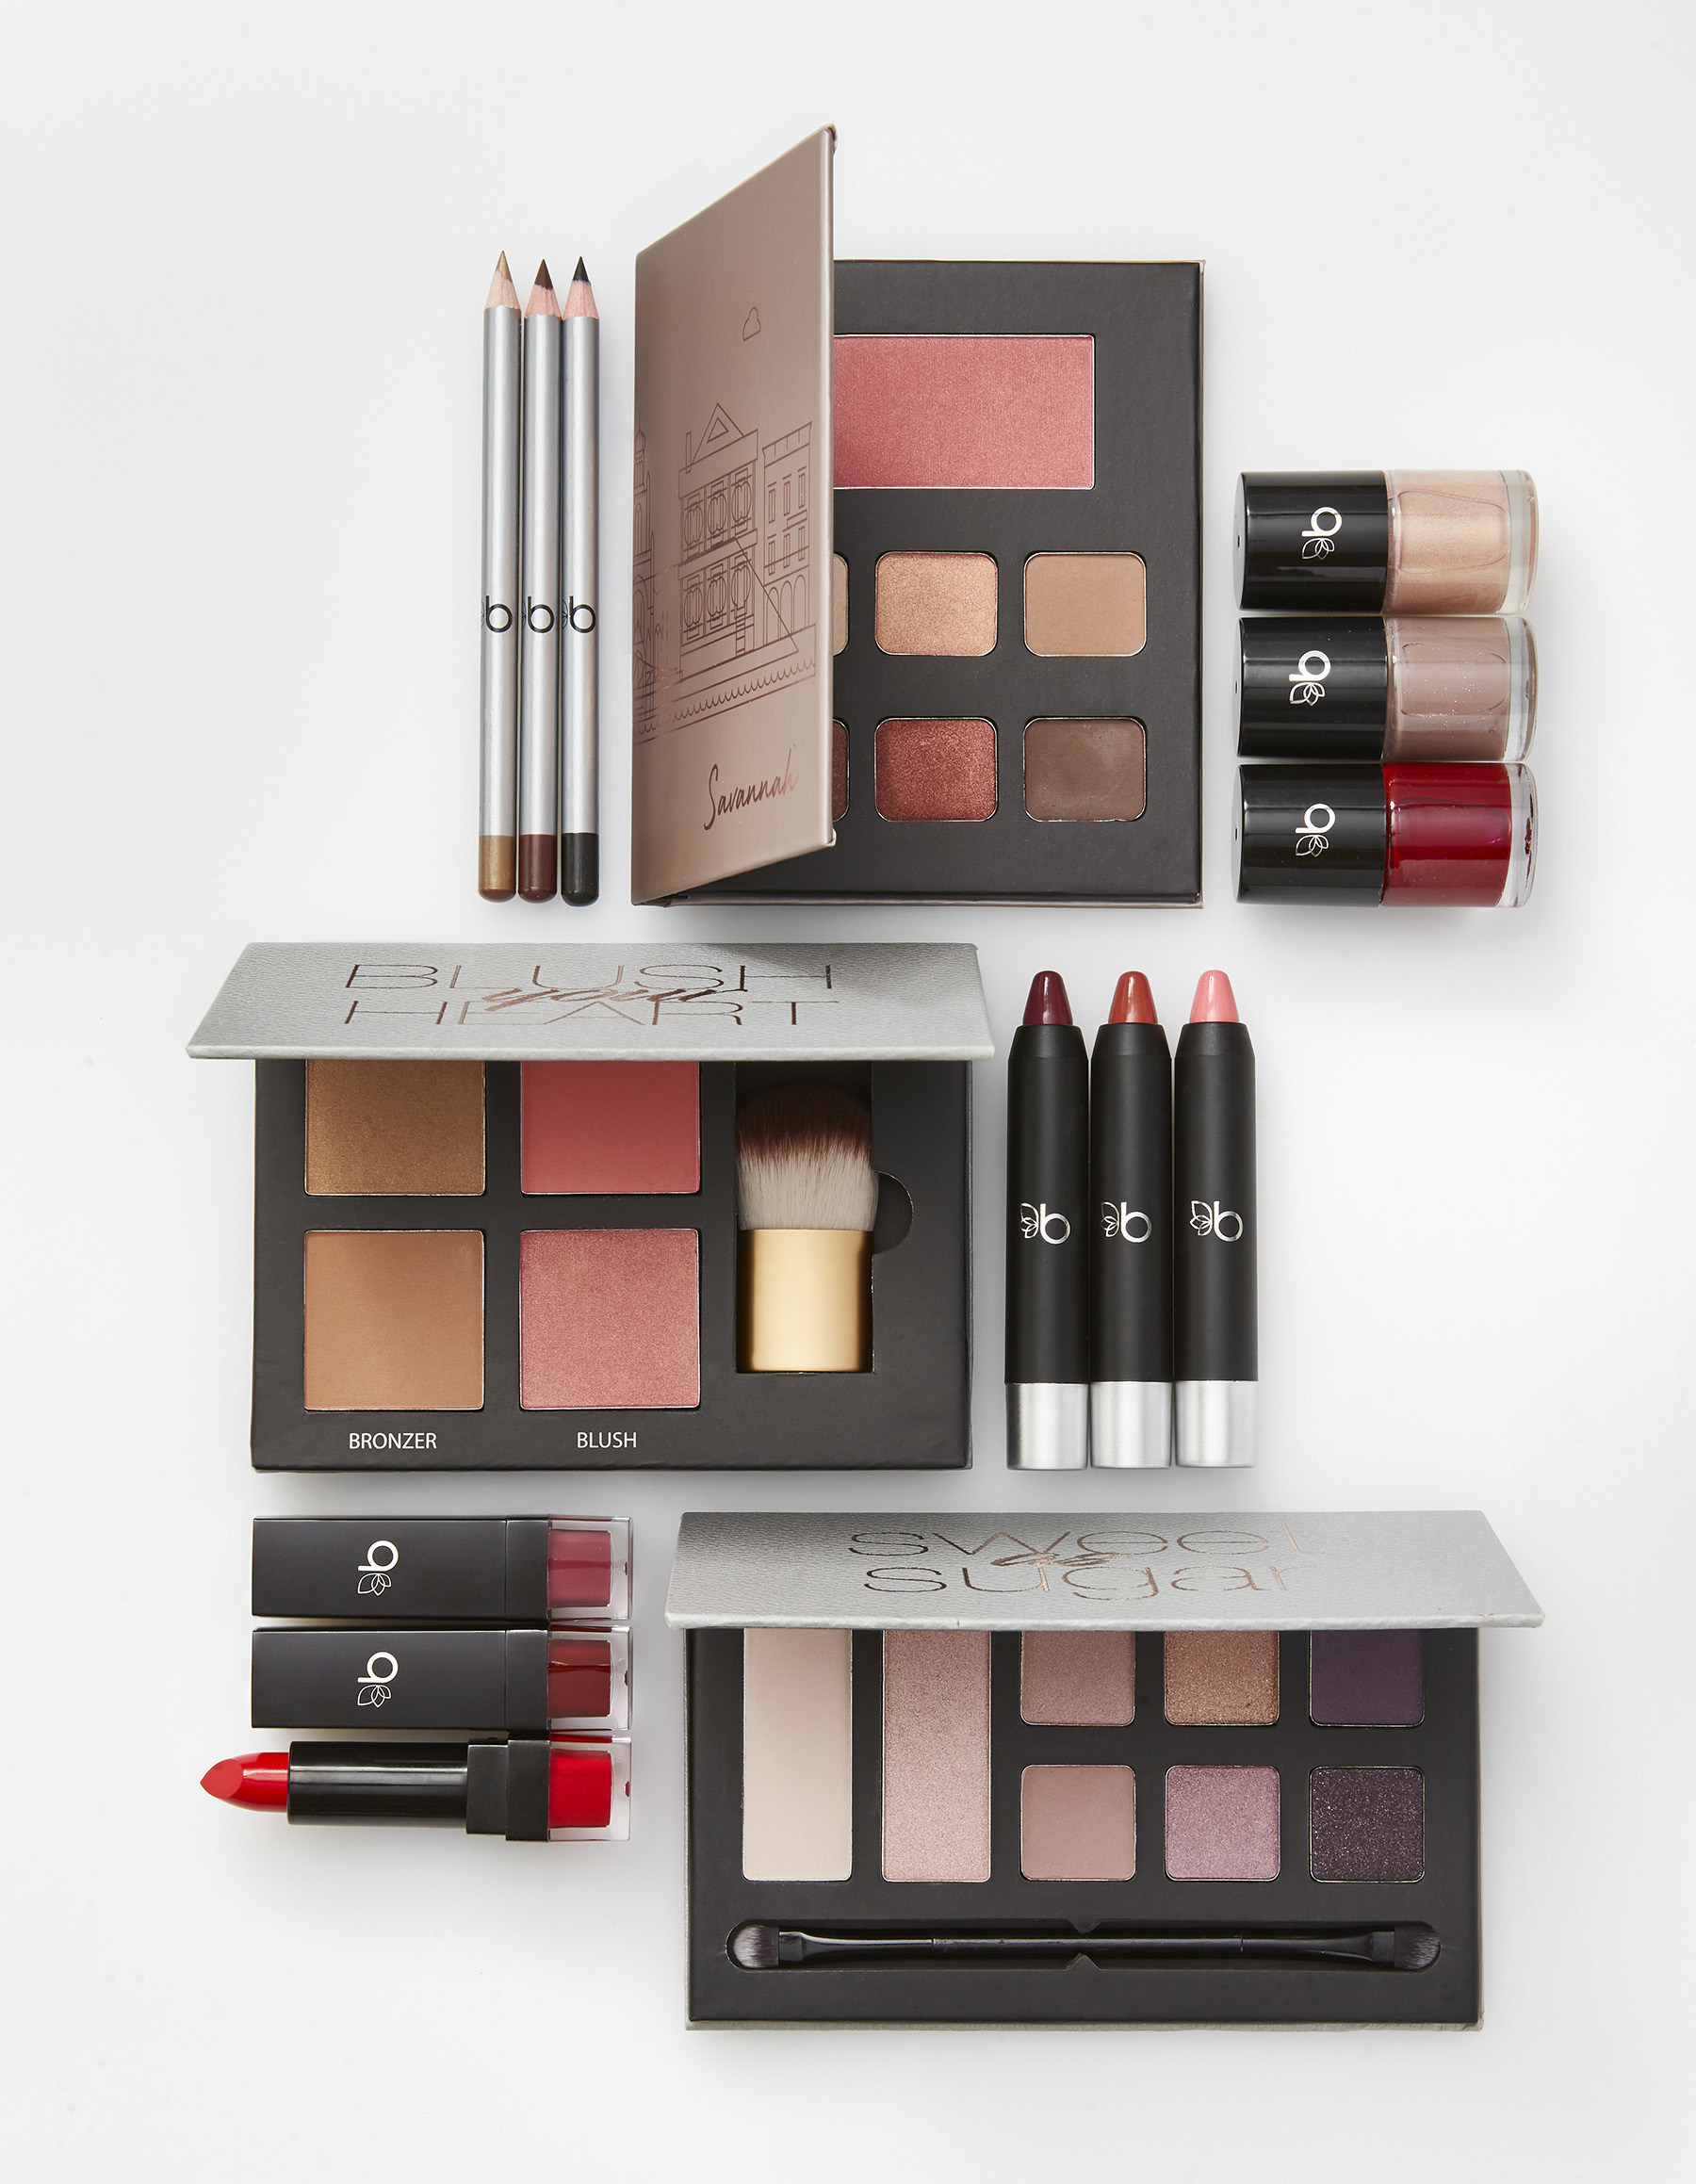 Belk Introduces Private Label Beauty